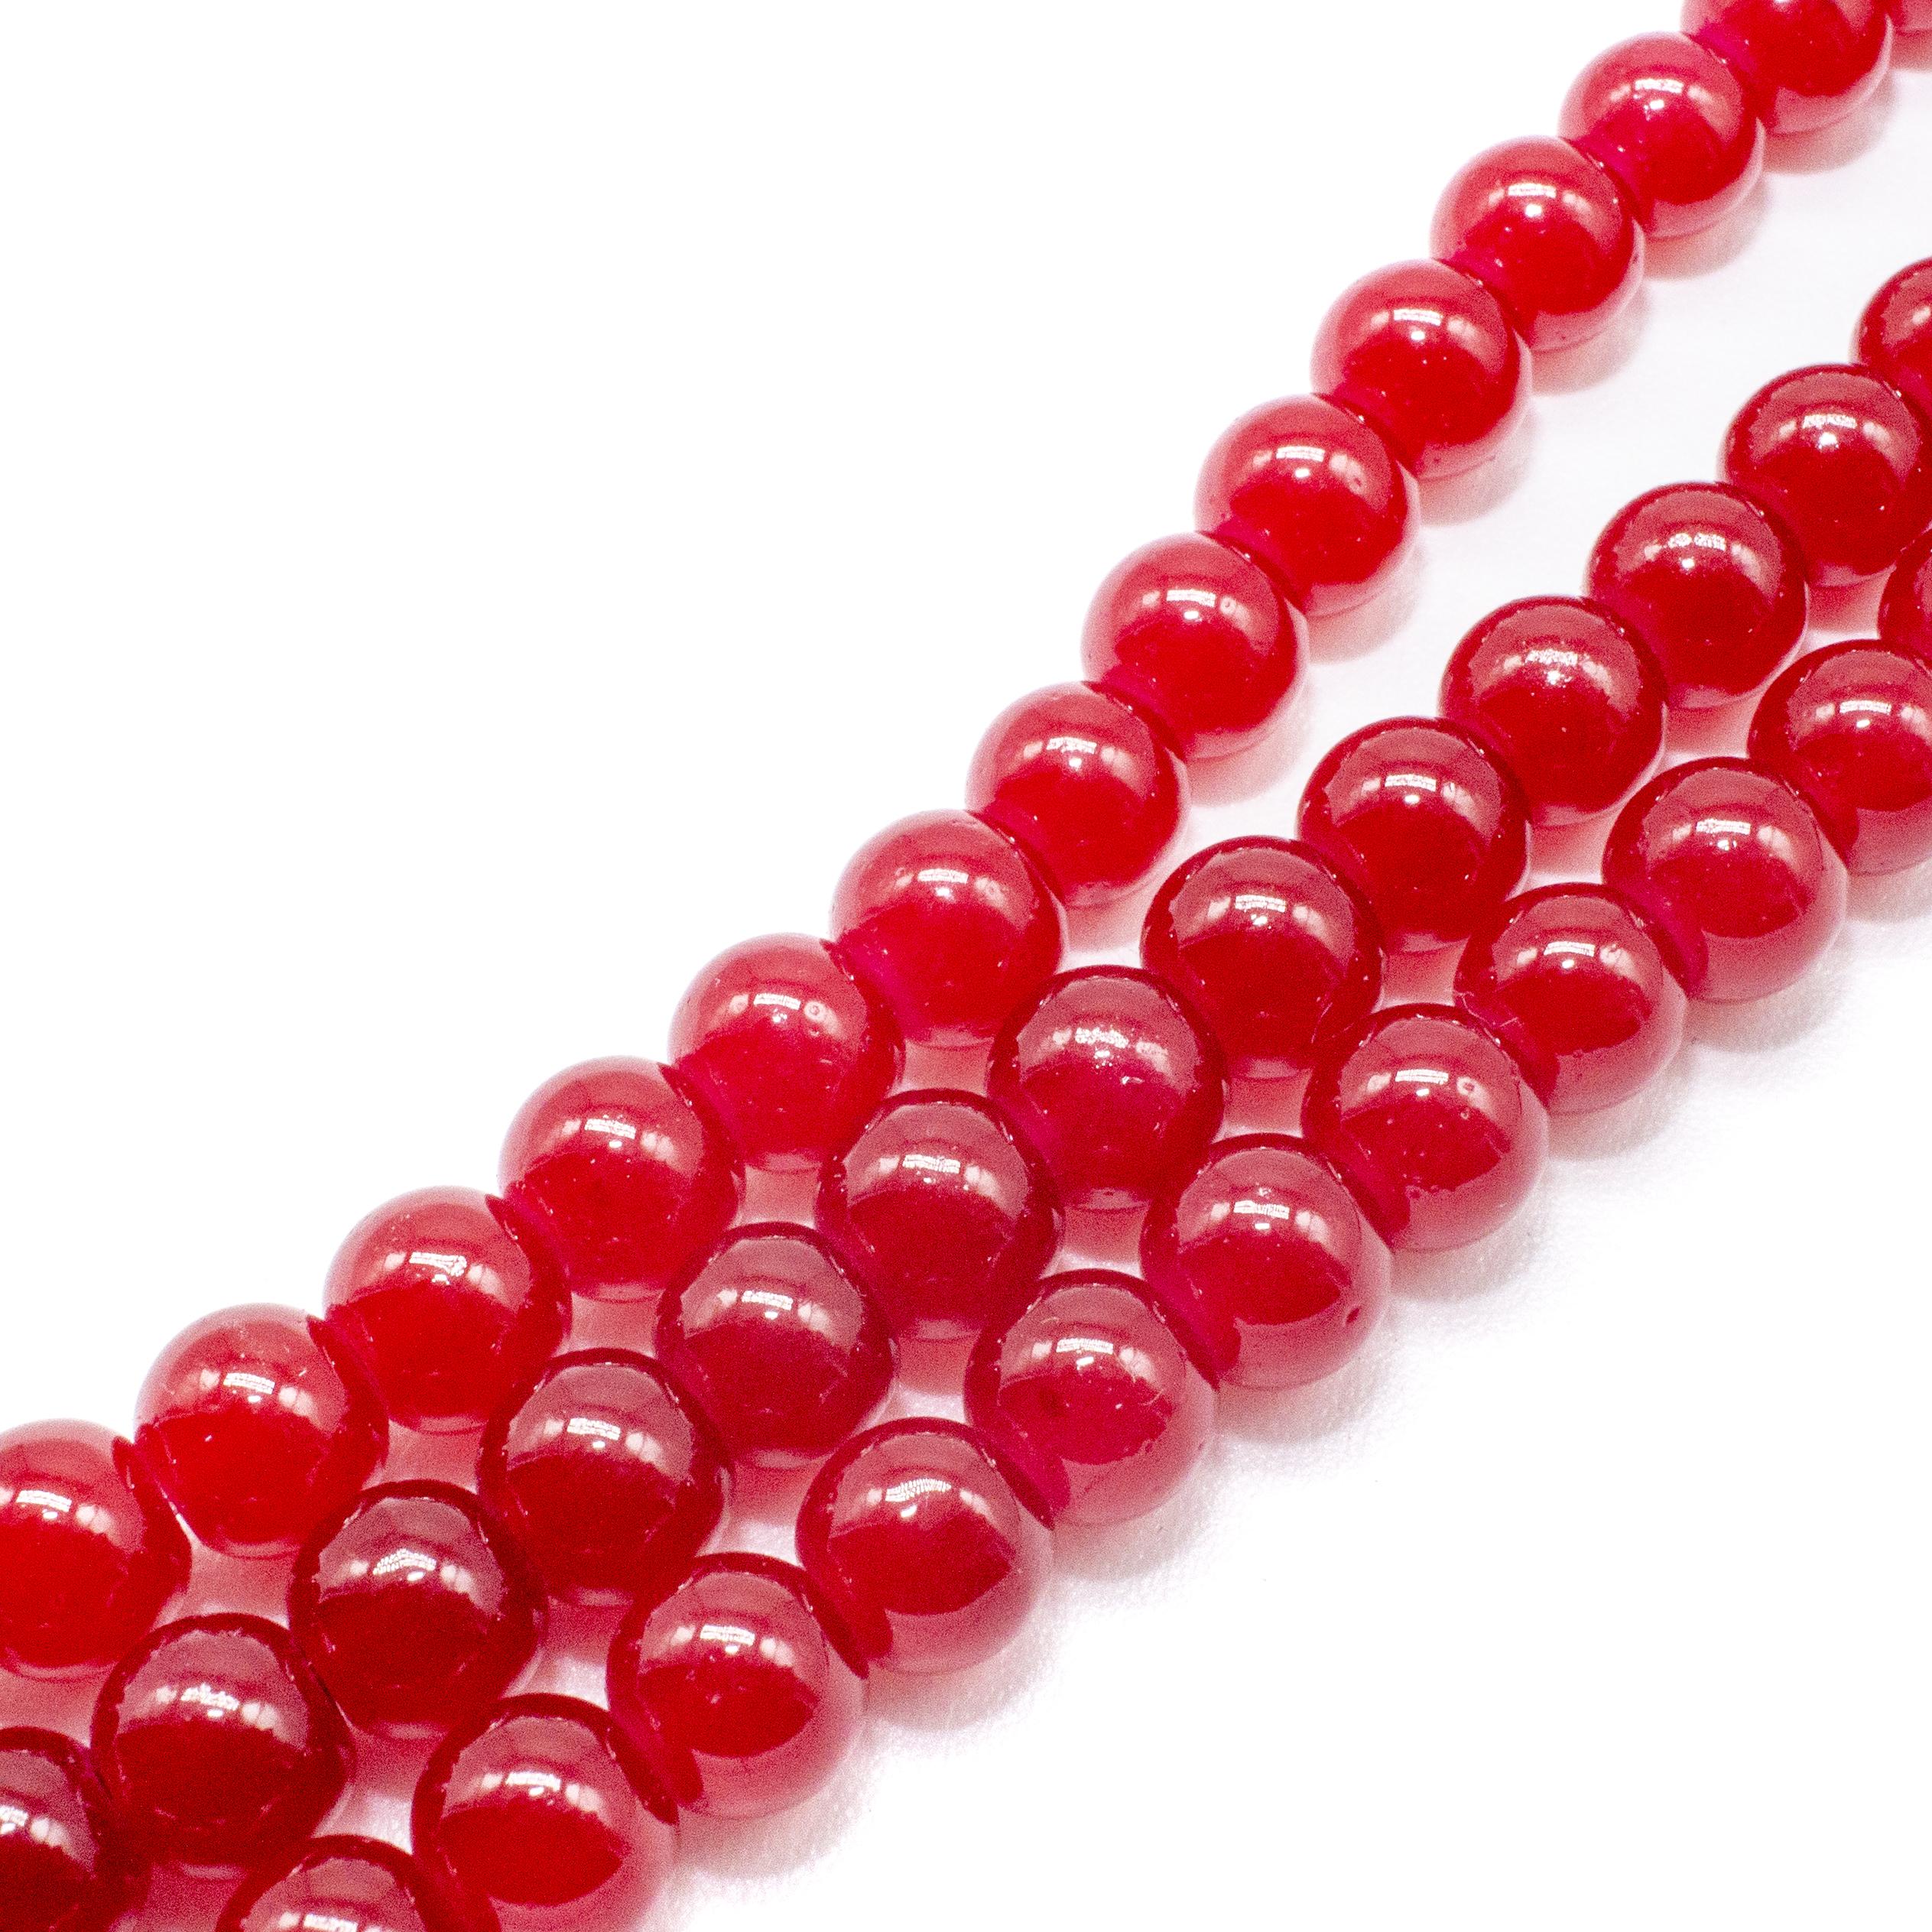 Milky Glass Beads 6mm - Opal Red